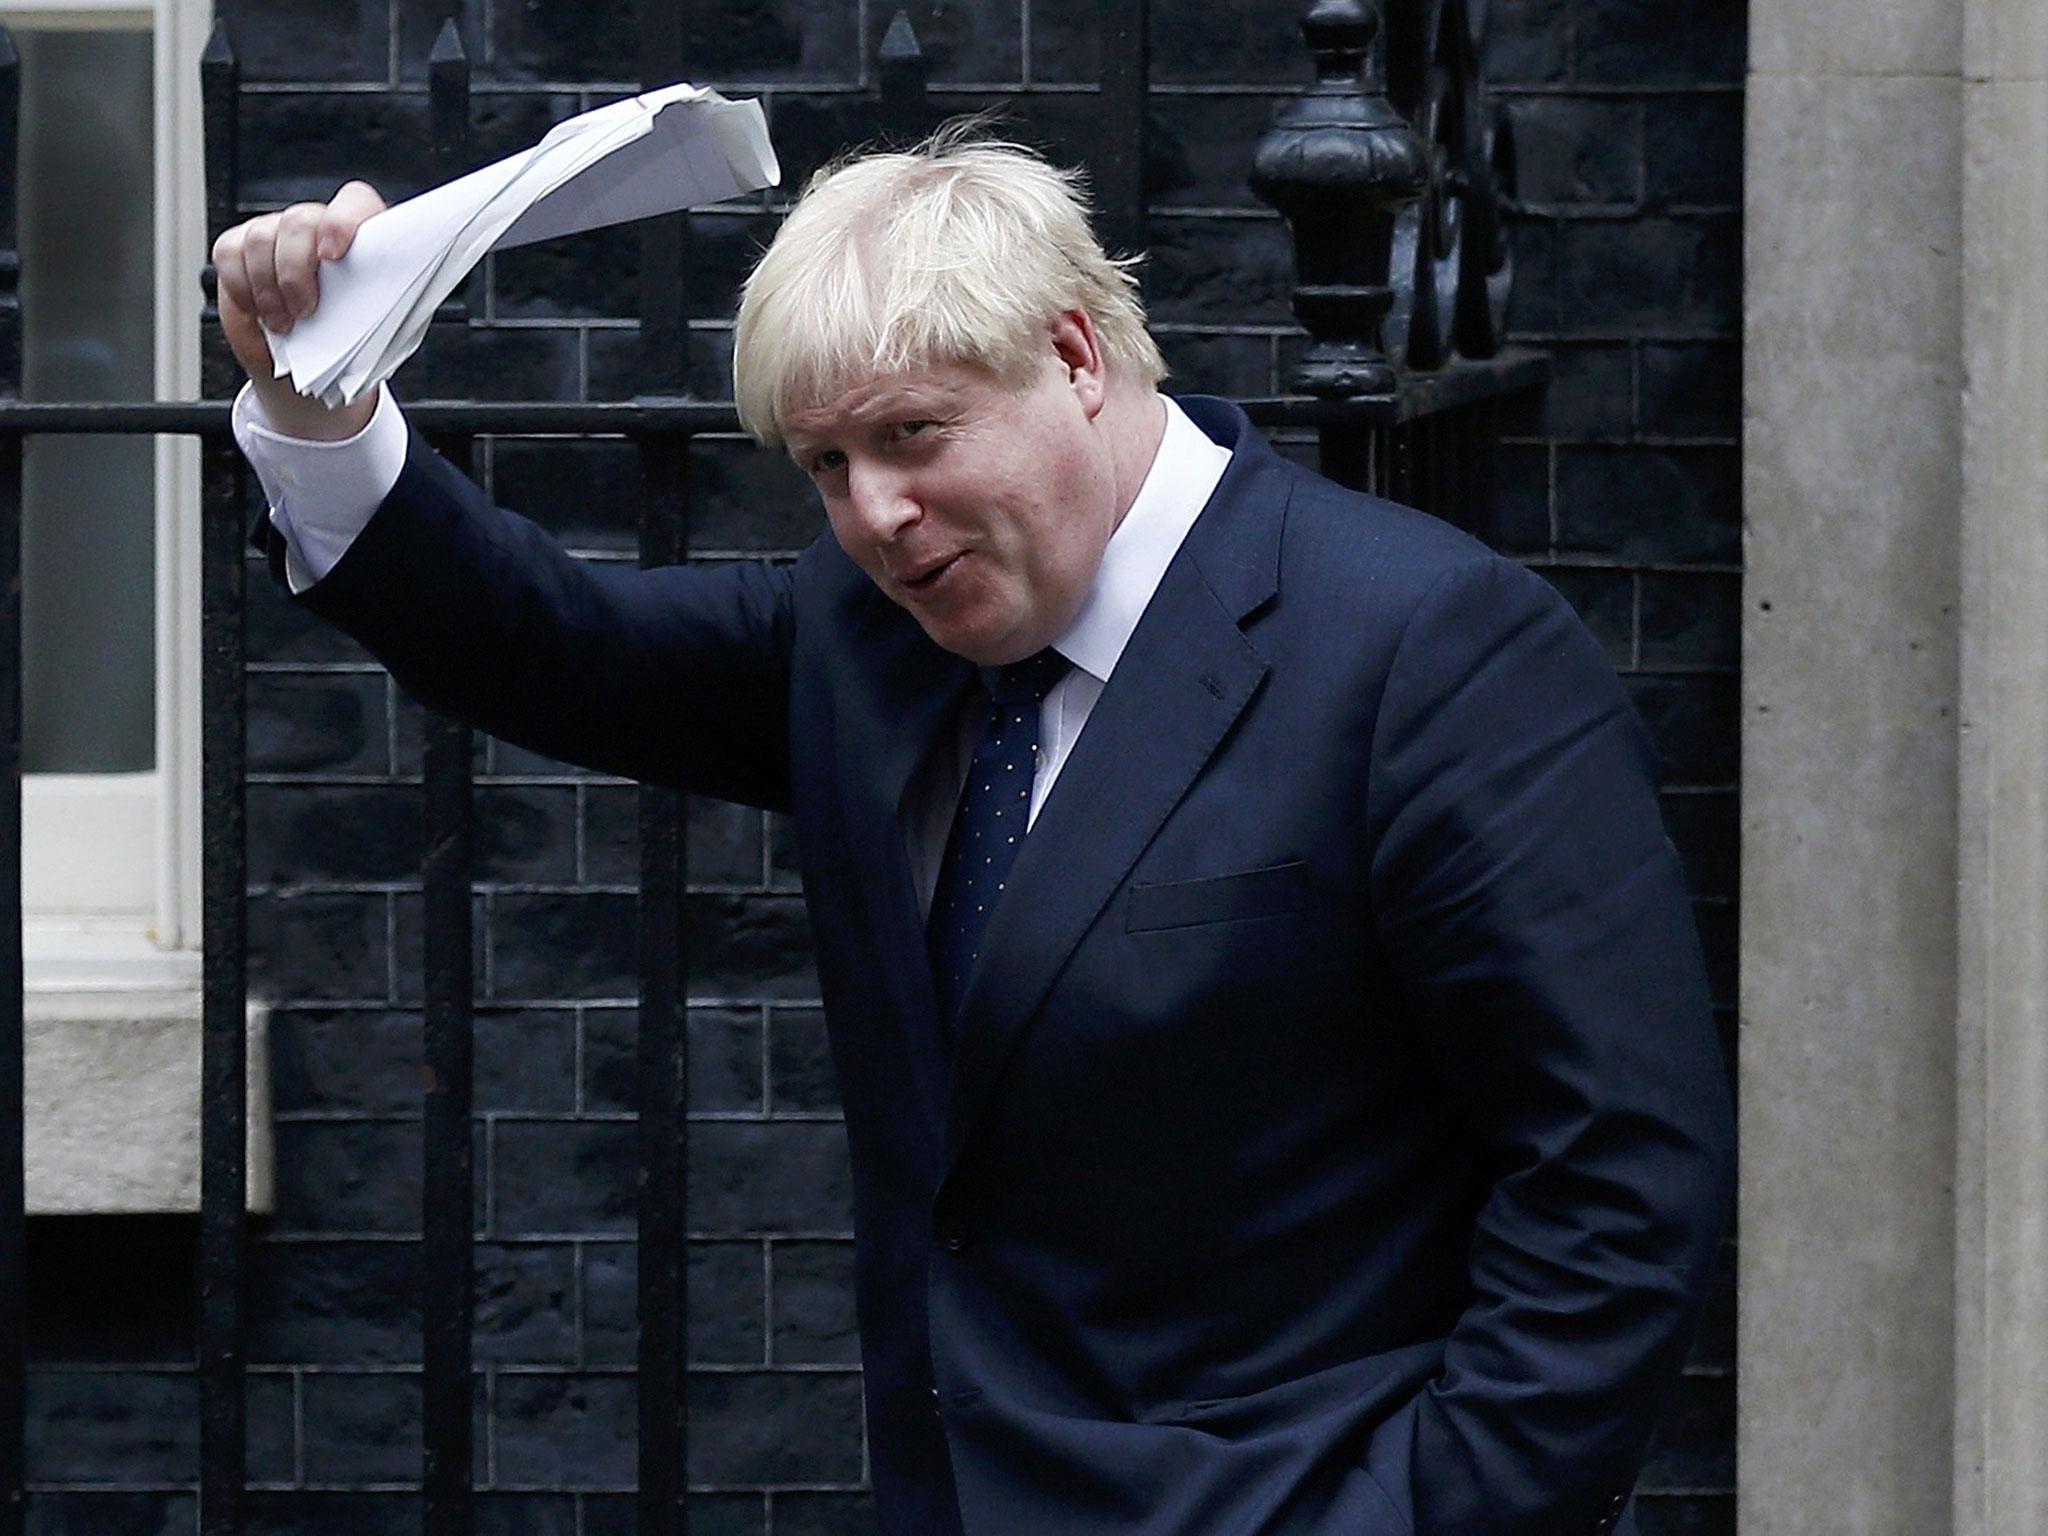 Britain's Foreign Secretary Boris Johnson leaves 10 Downing Street after a cabinet meeting, in London, 15 November, 2016